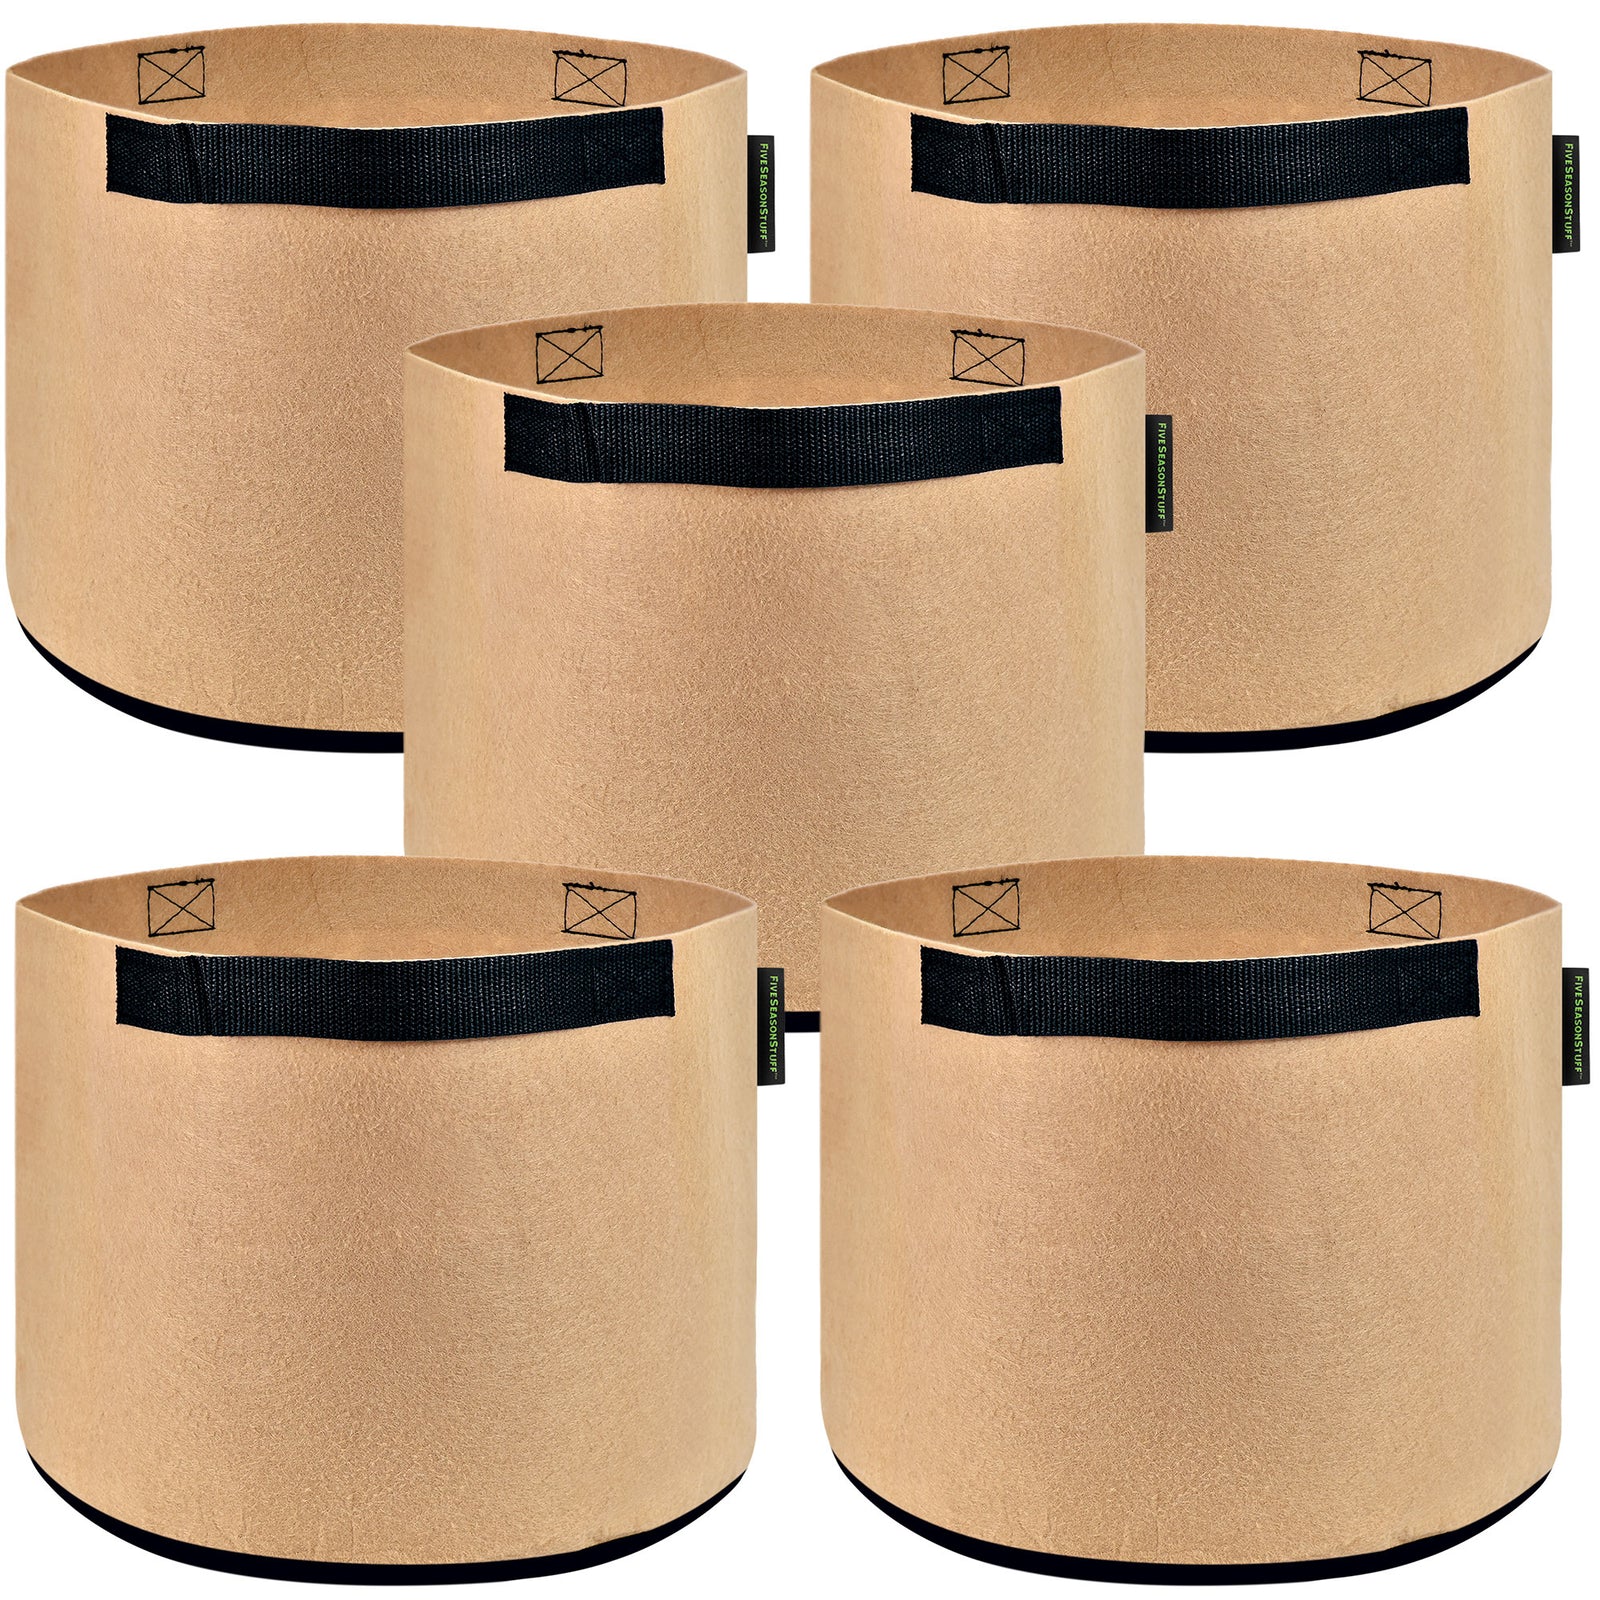 5 Pack 5 Gallons Grow Bags - Breathable Fabric Pots for Healthier Plants Vegetables Flowers – Heavy Duty Thick Containers with Sturdy Handles - Aeration Planters for Smart Gardening (Khaki)